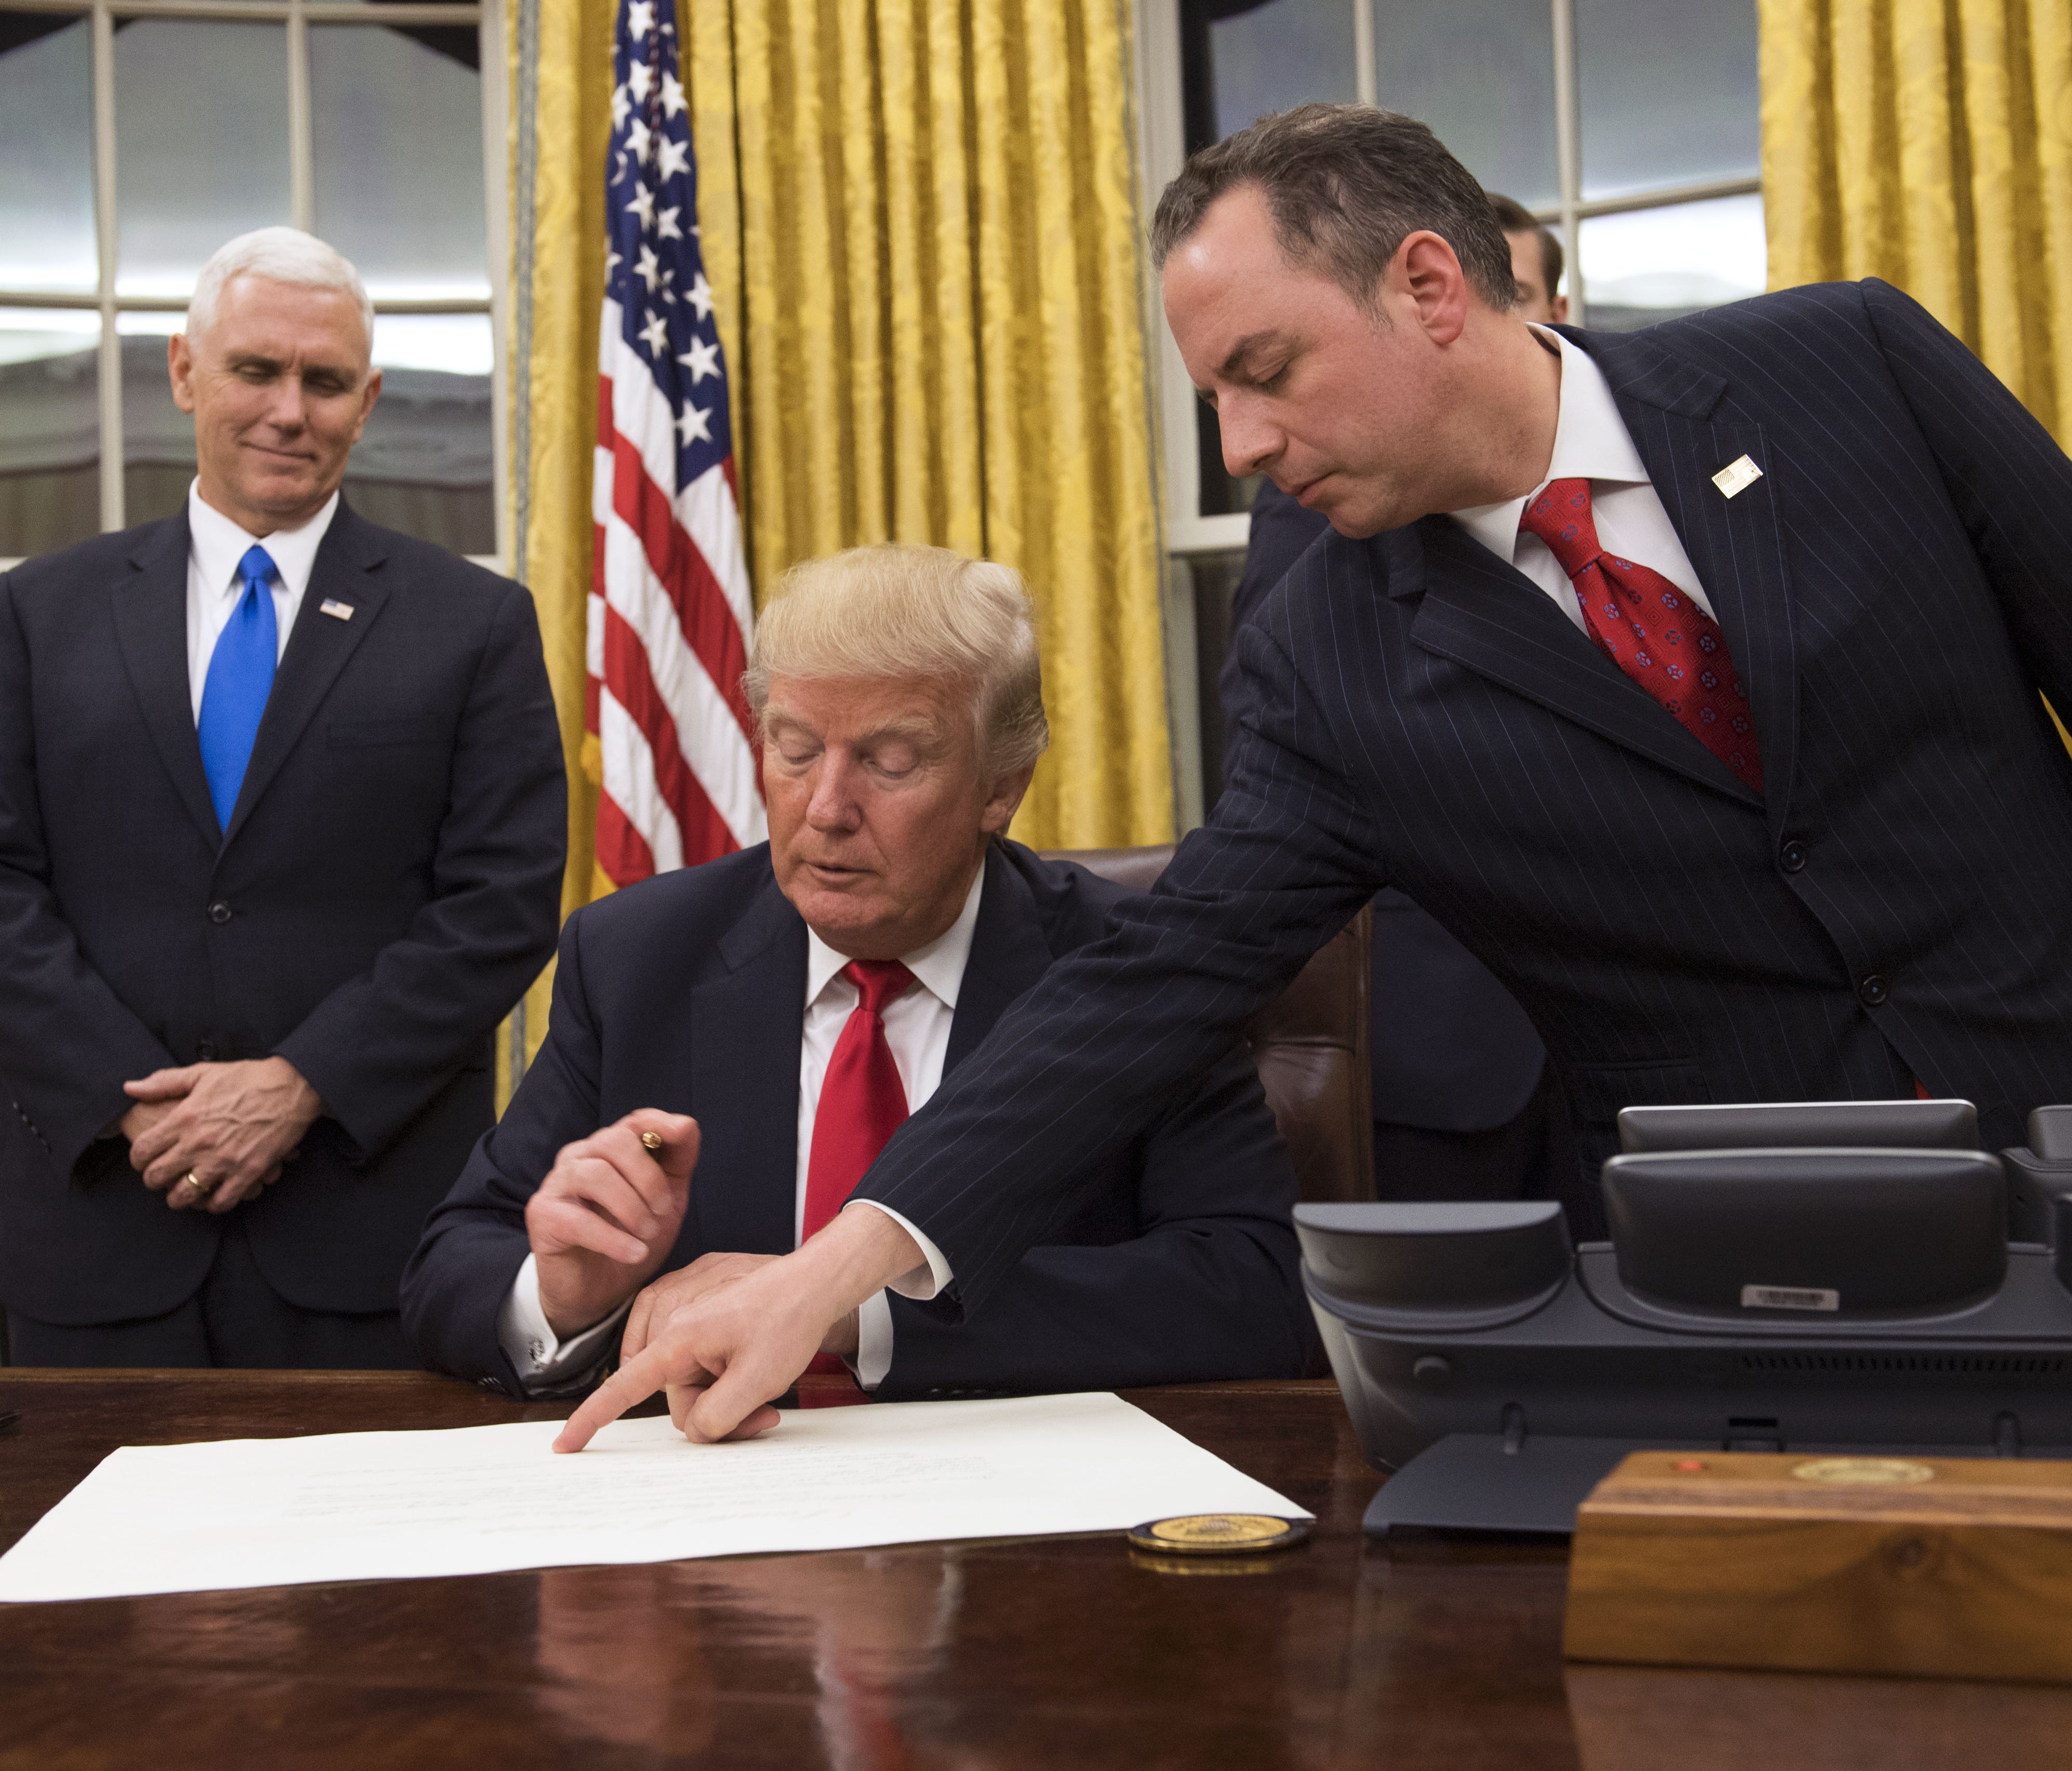 White House chief of staff Reince Priebus, at right, with President Trump and Vice President Pence.